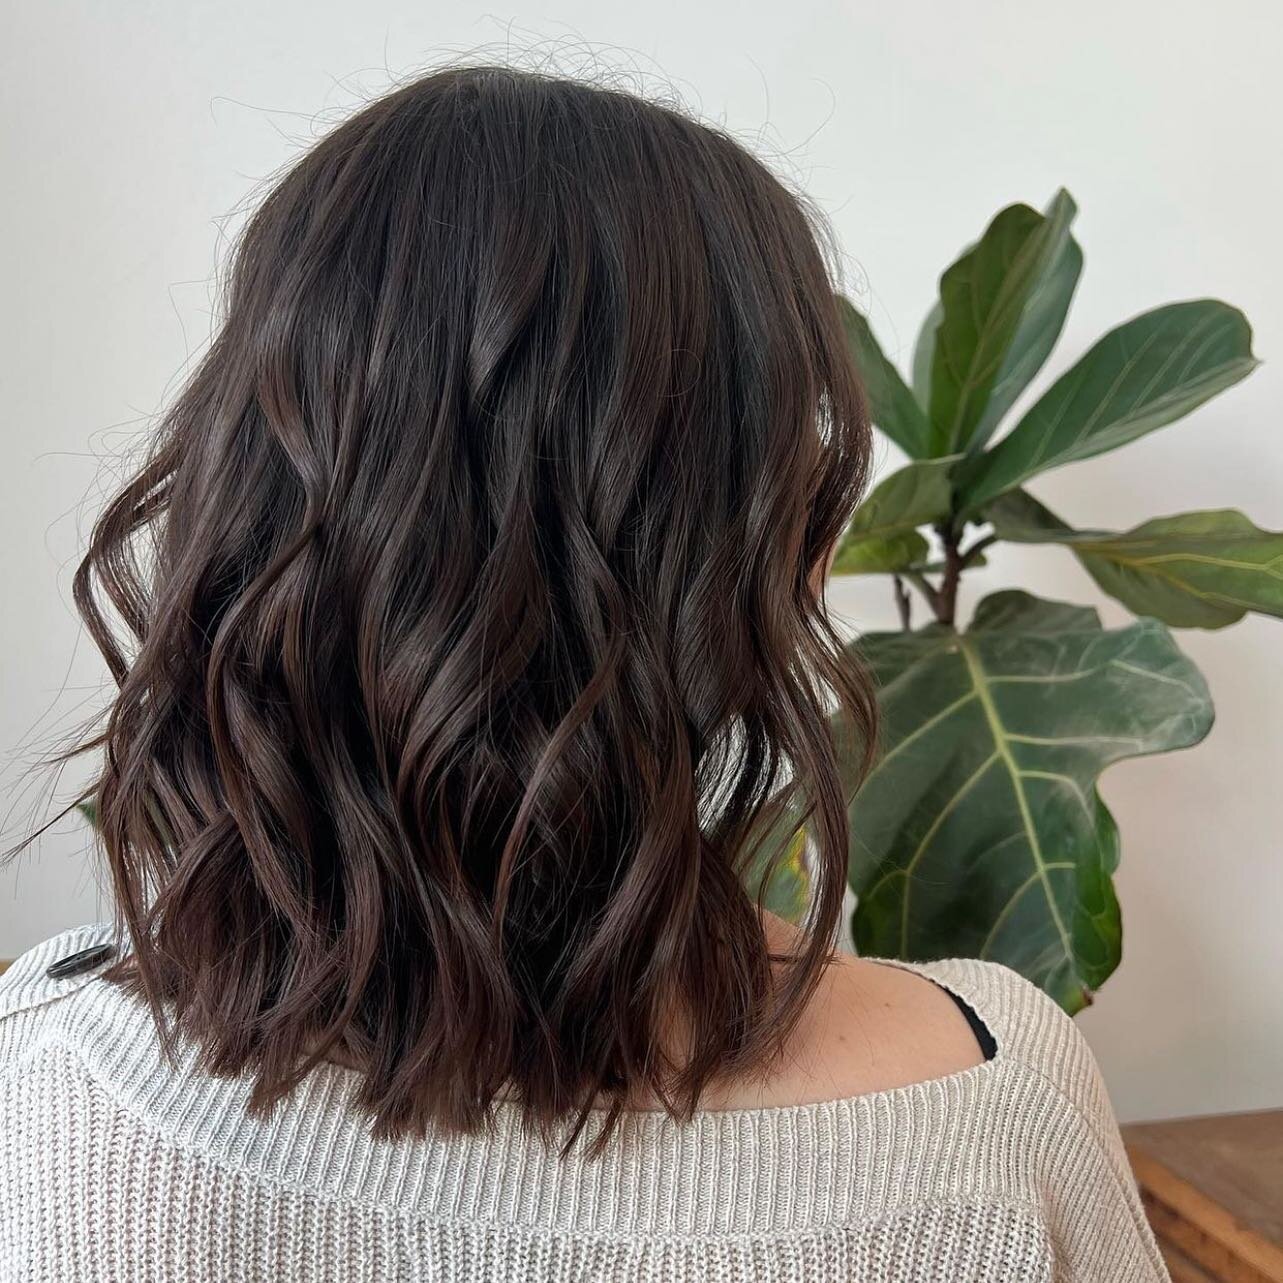 A gorgeous classic, rich brunette and sexy waves. Hair by @hairwith.brittany 

#sebastopolsalon #sebastopolstylist #brunette #bob #bobhaircut #sexywaves #beachwaves #sebastopolhairstylist #kinfolk